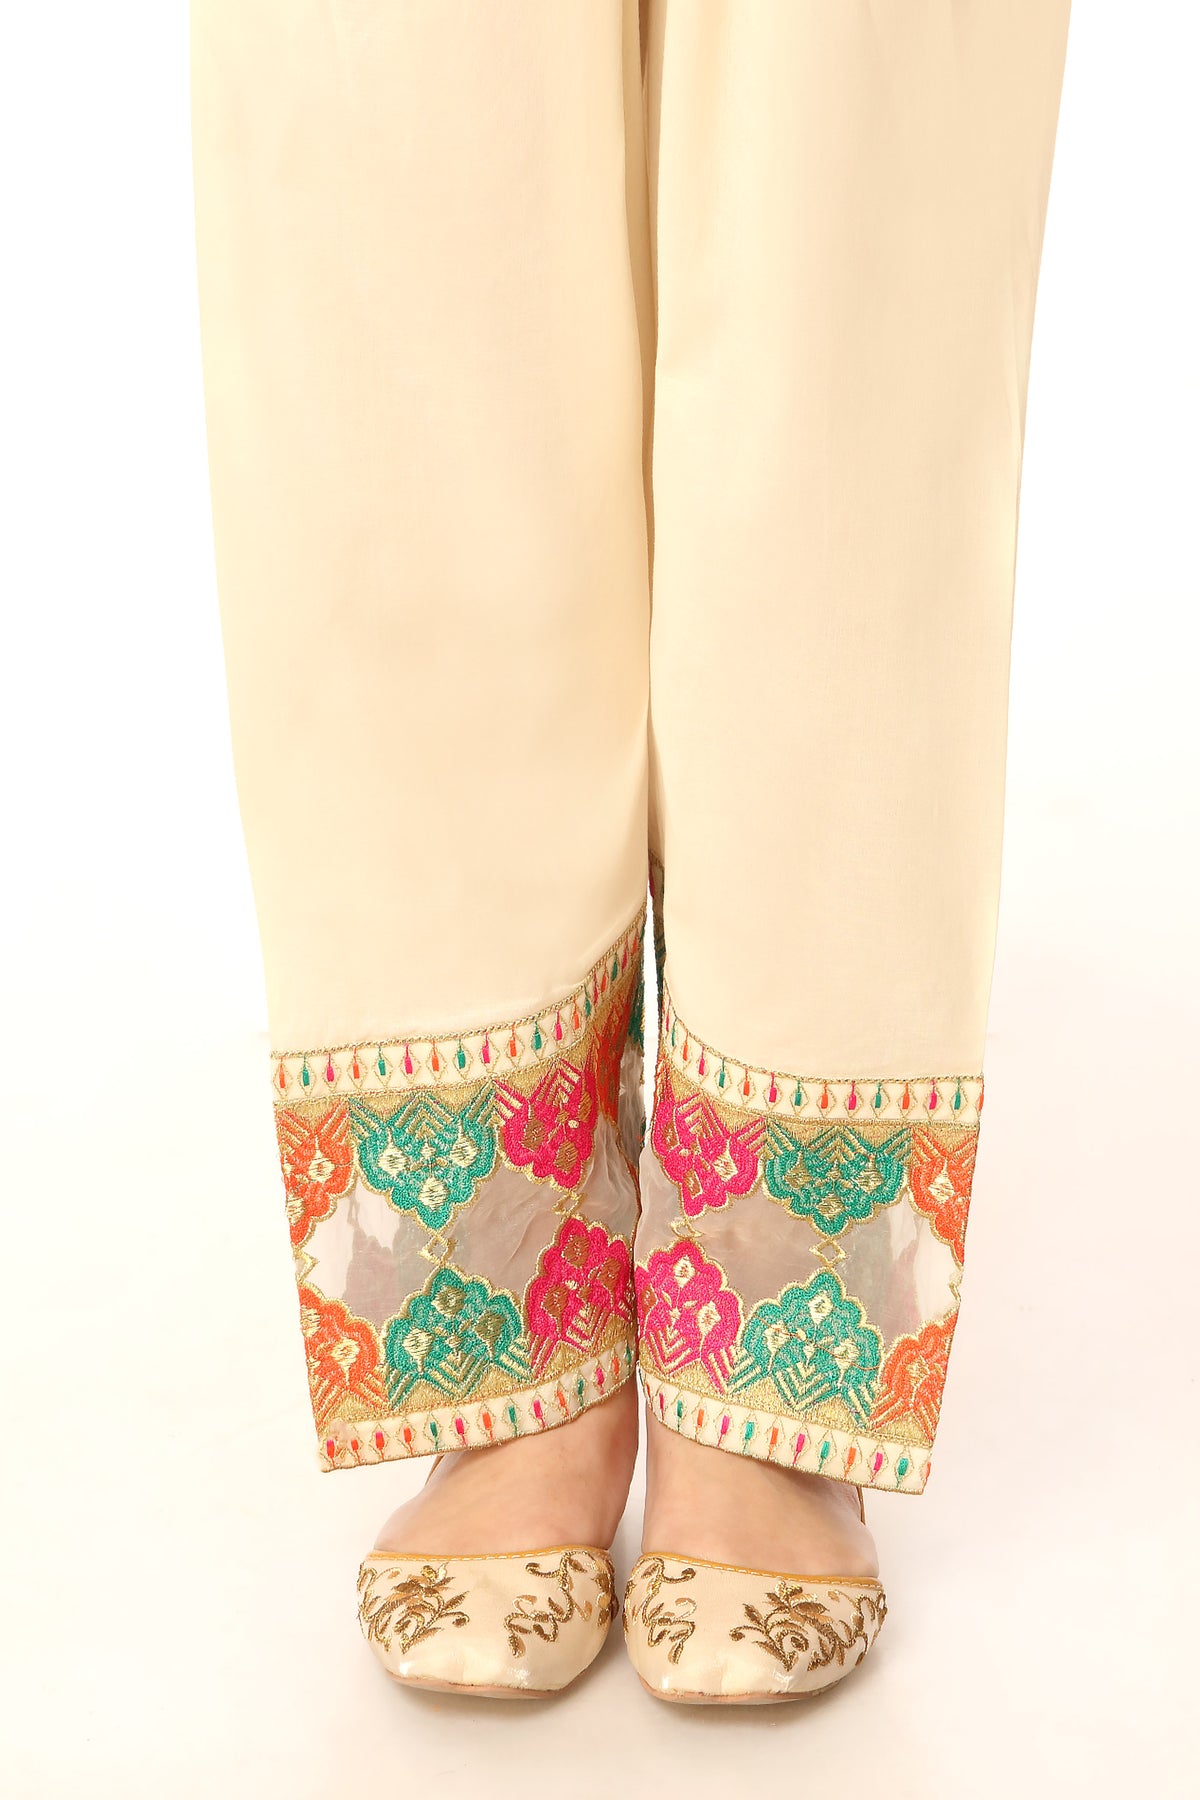 Organza Shalwar in Off White coloured Printed Lawn fabric